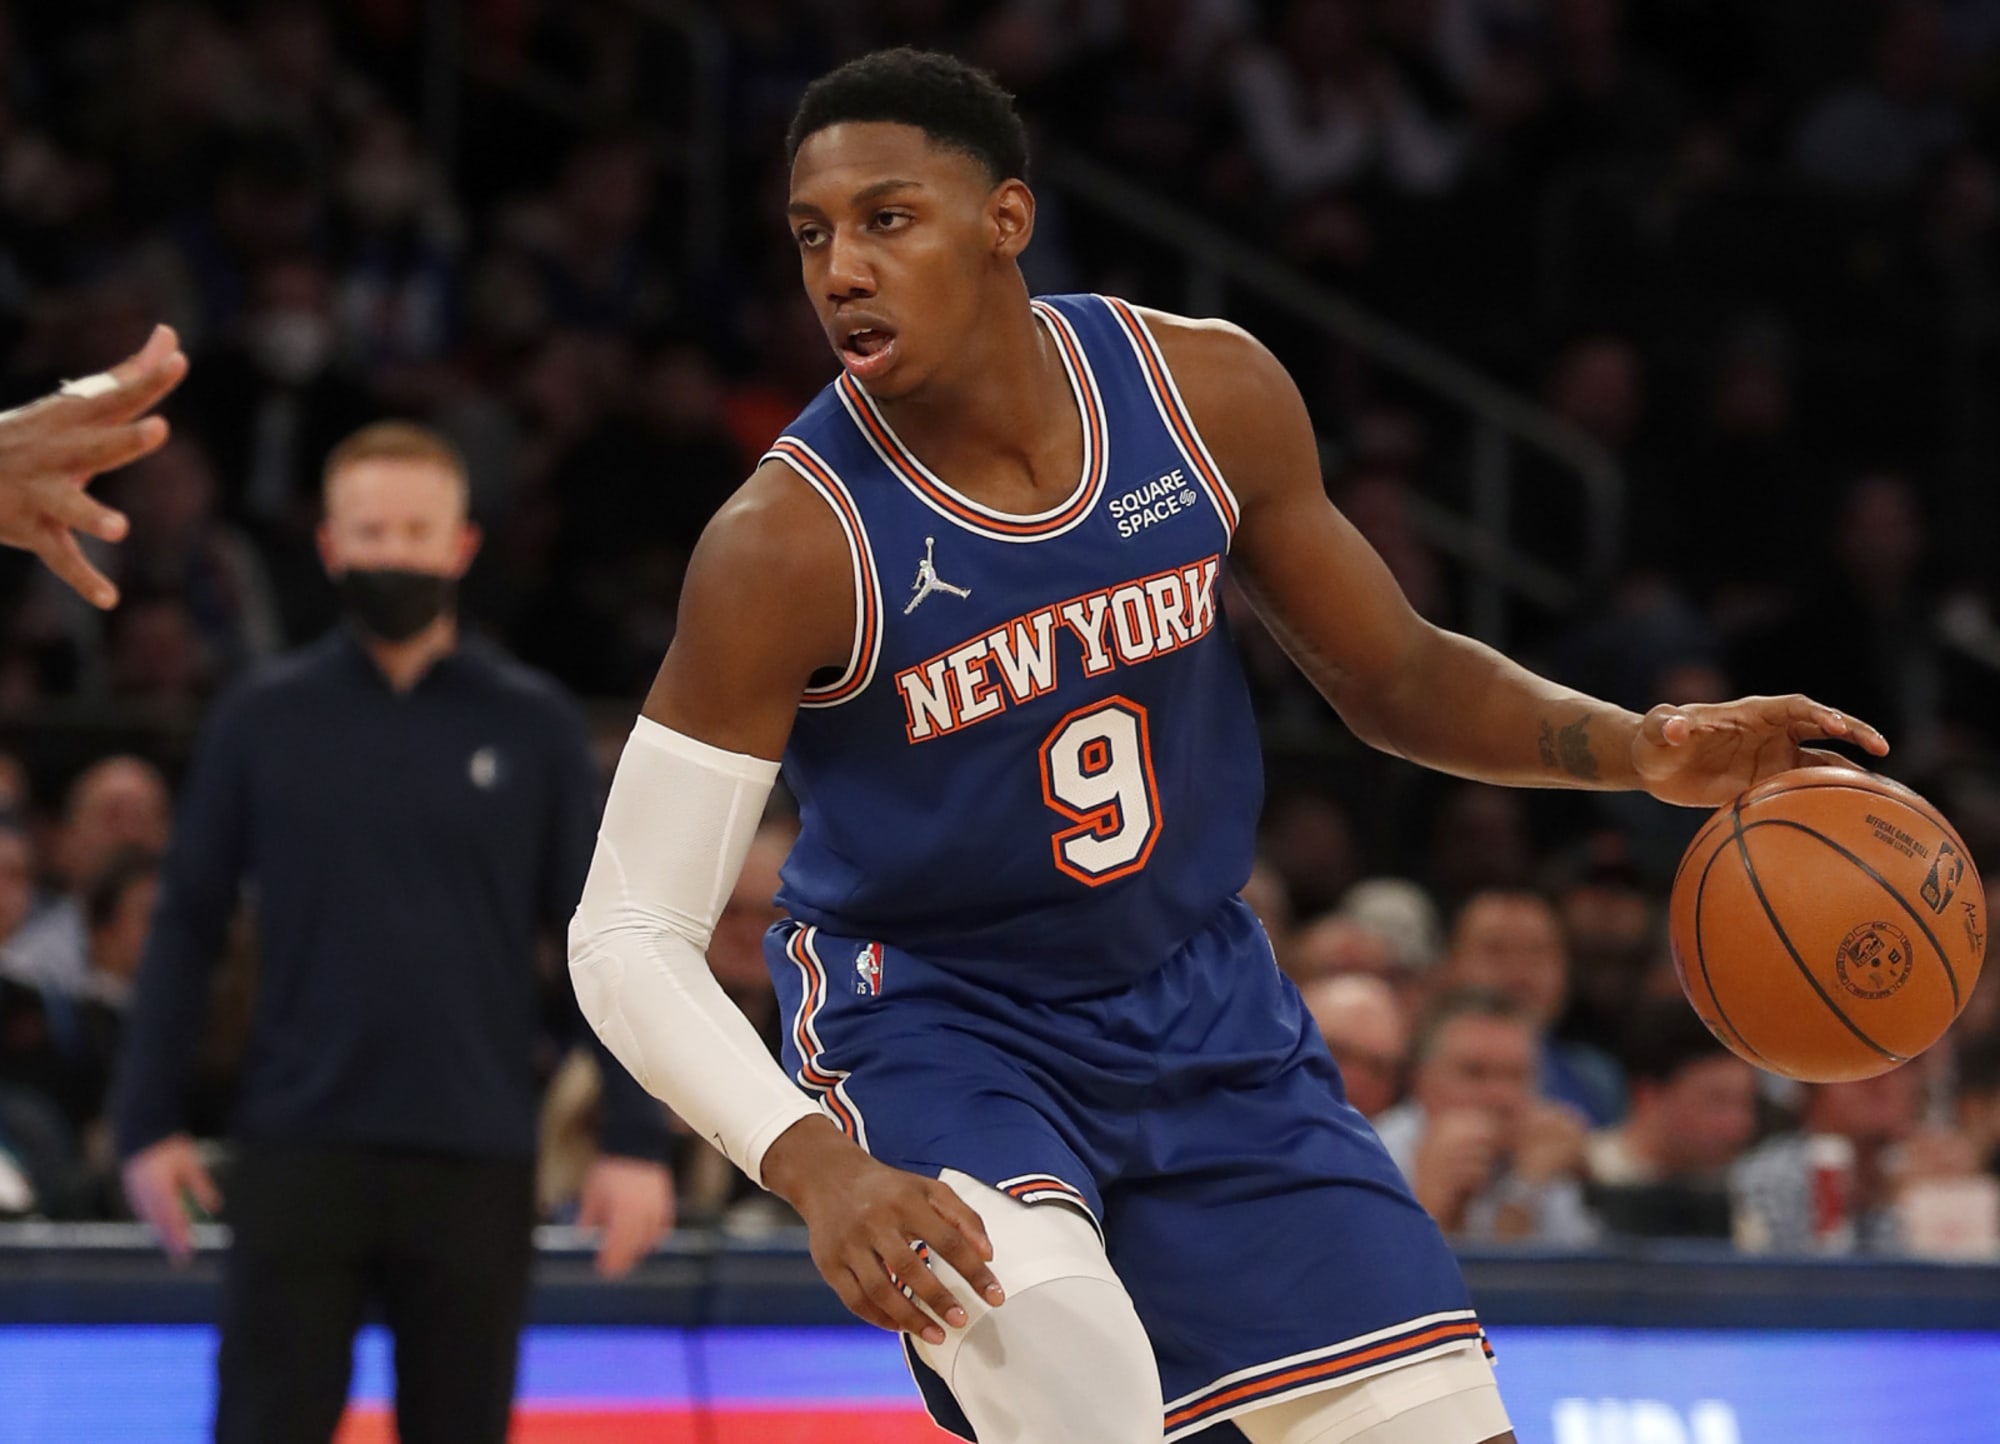 It's time for RJ Barrett to lead the New York Knicks